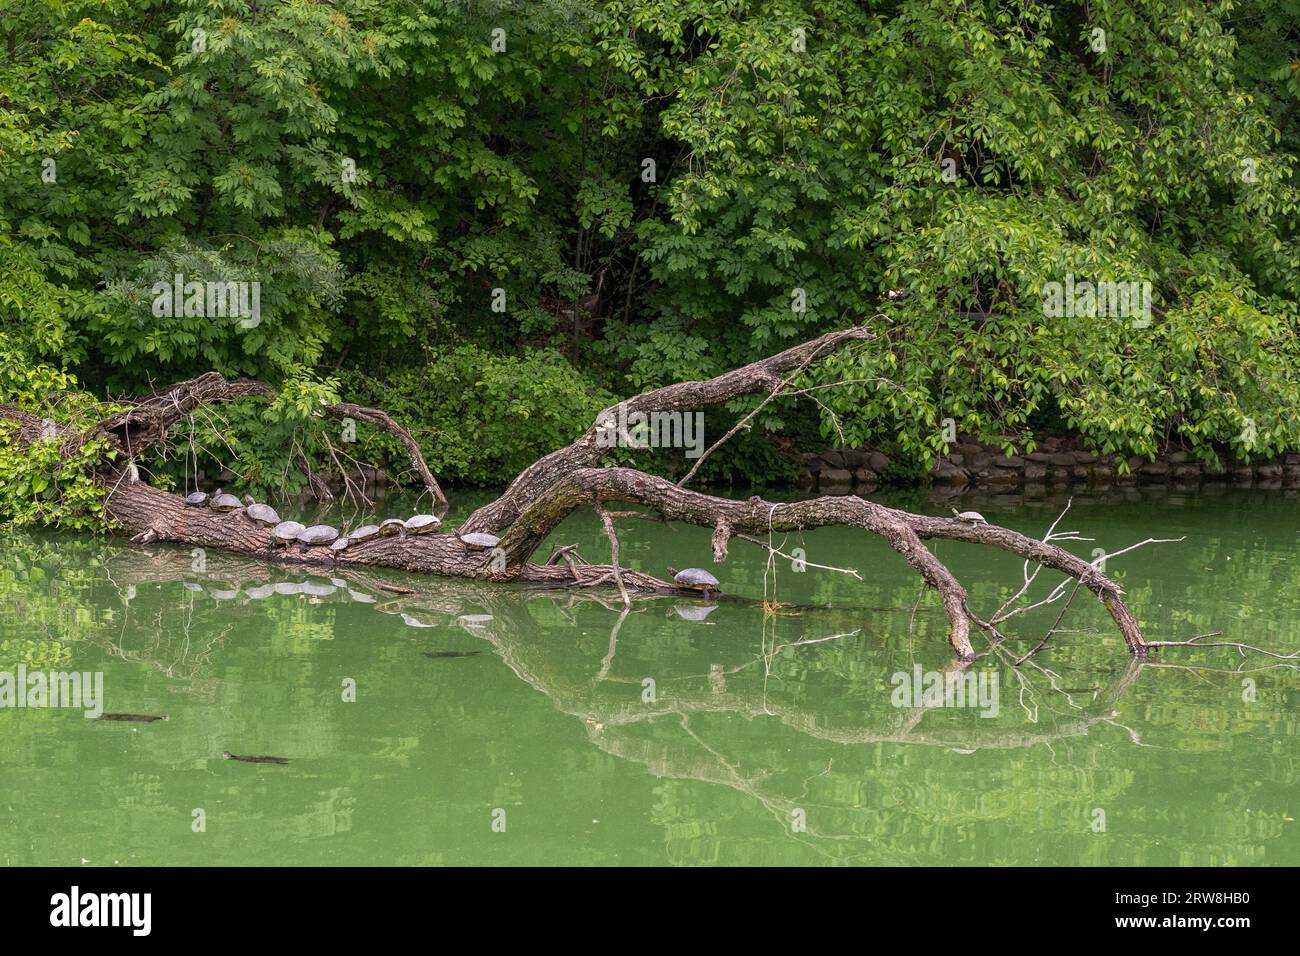 Pond sliders (Trachemys scripta), a specie of semi-aquatic turtle, swimming and resting on a trunk in the pond of the Ducal Park of Parma, Italy Stock Photo